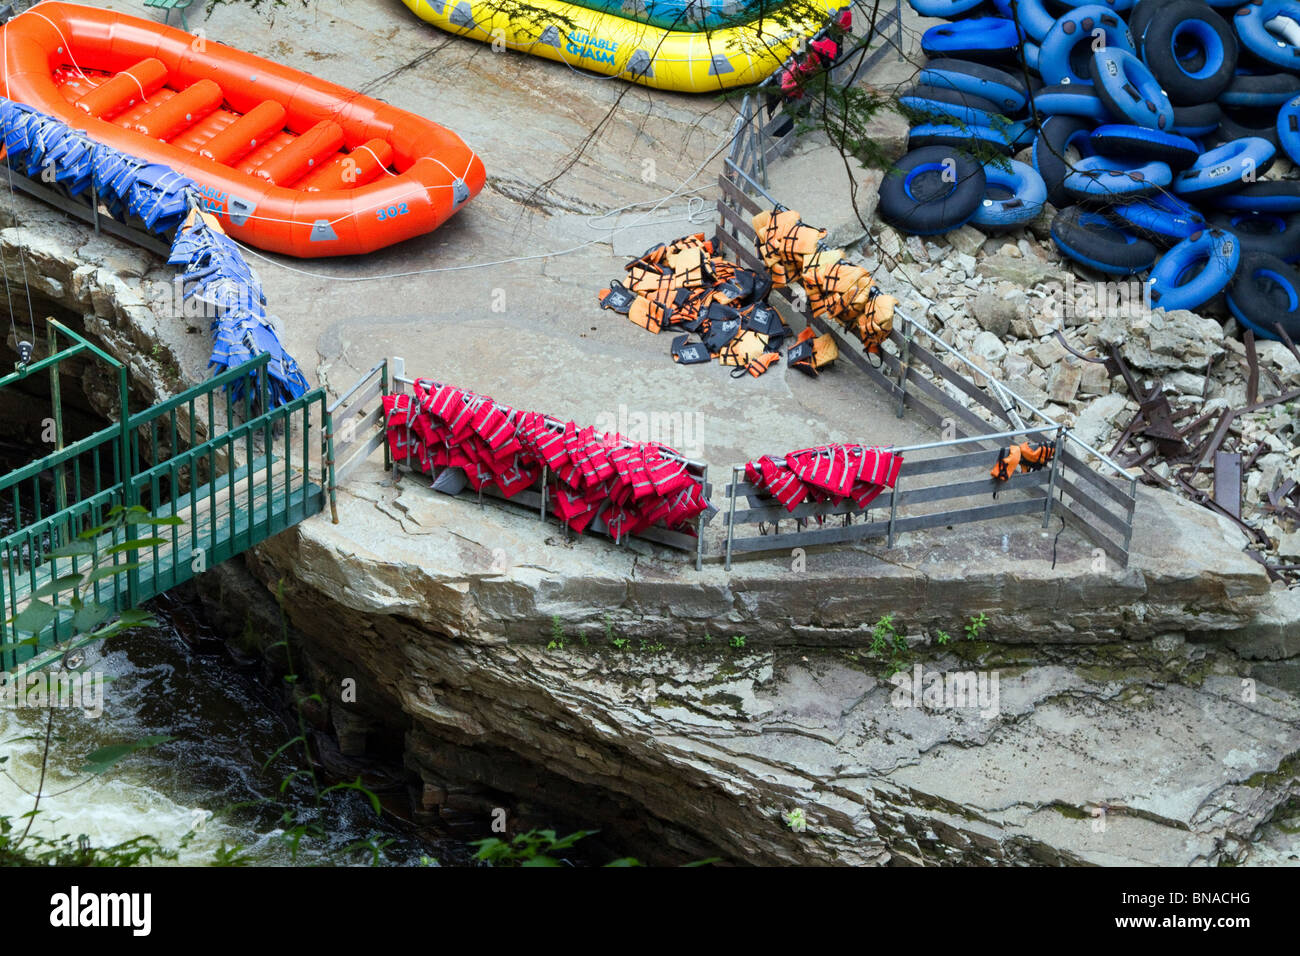 Rubber rafts, life vests and tubes for floating down the Ausable Chasm in the Adirondack State Park of New York. Rafting Stock Photo